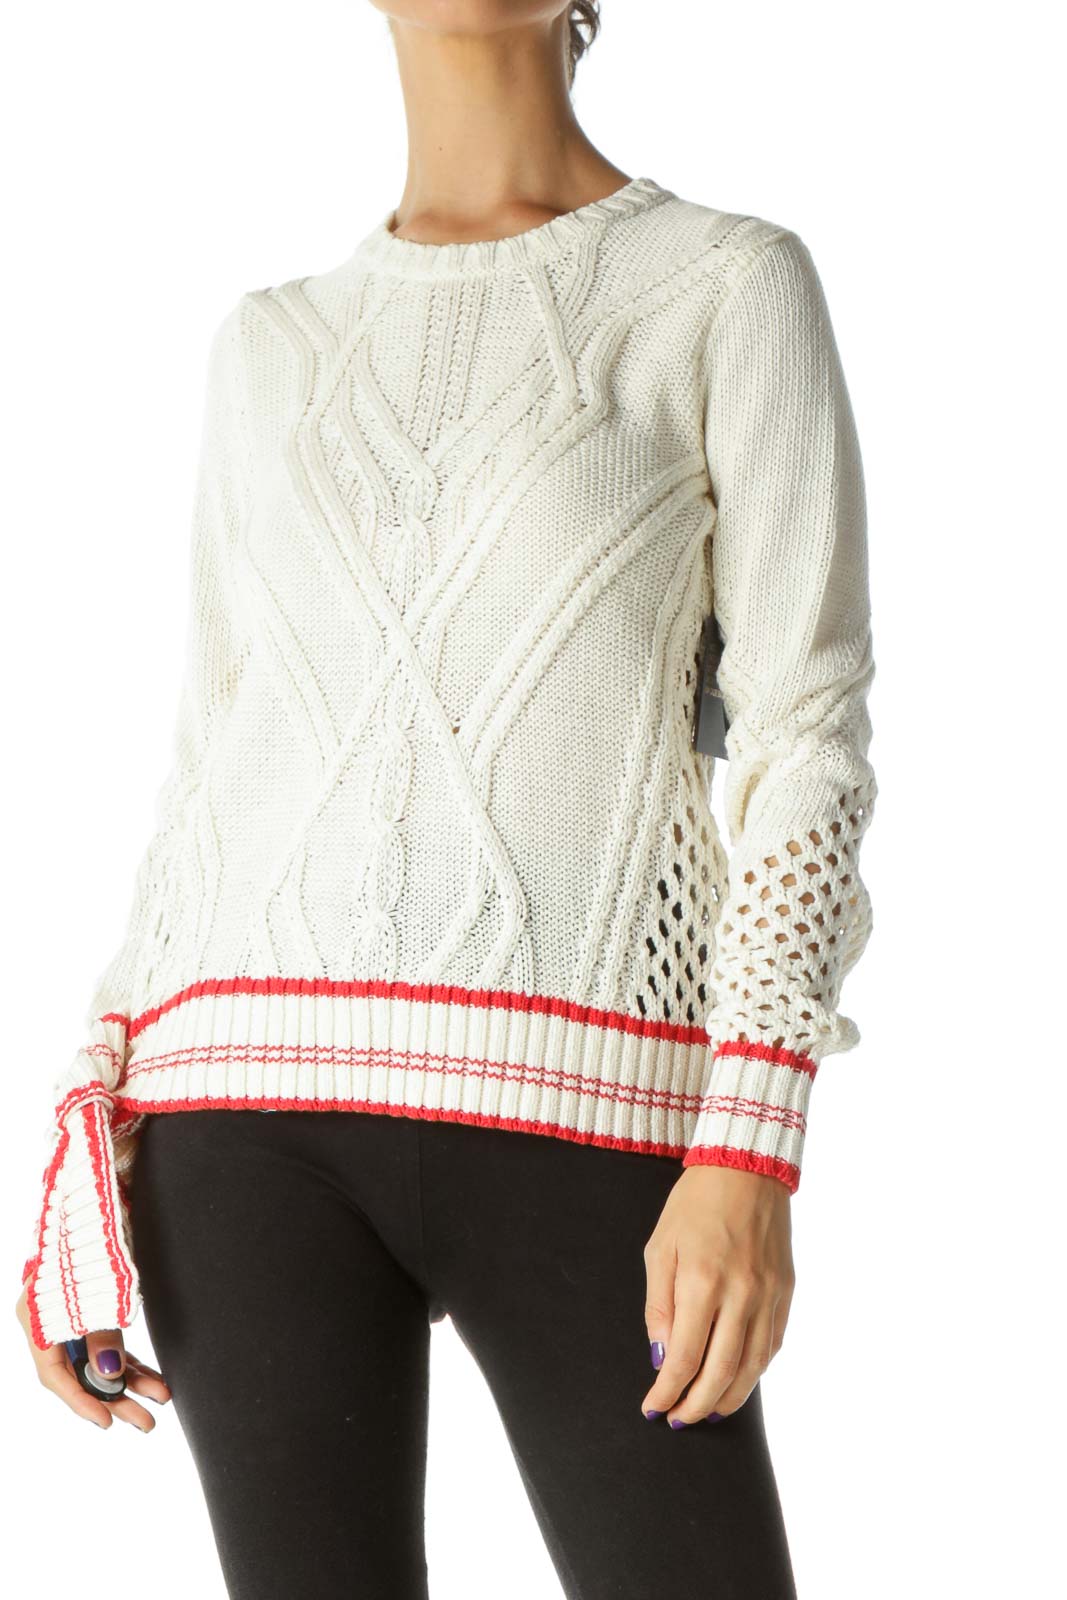 Cream Knit Sweater with Red Trim Front